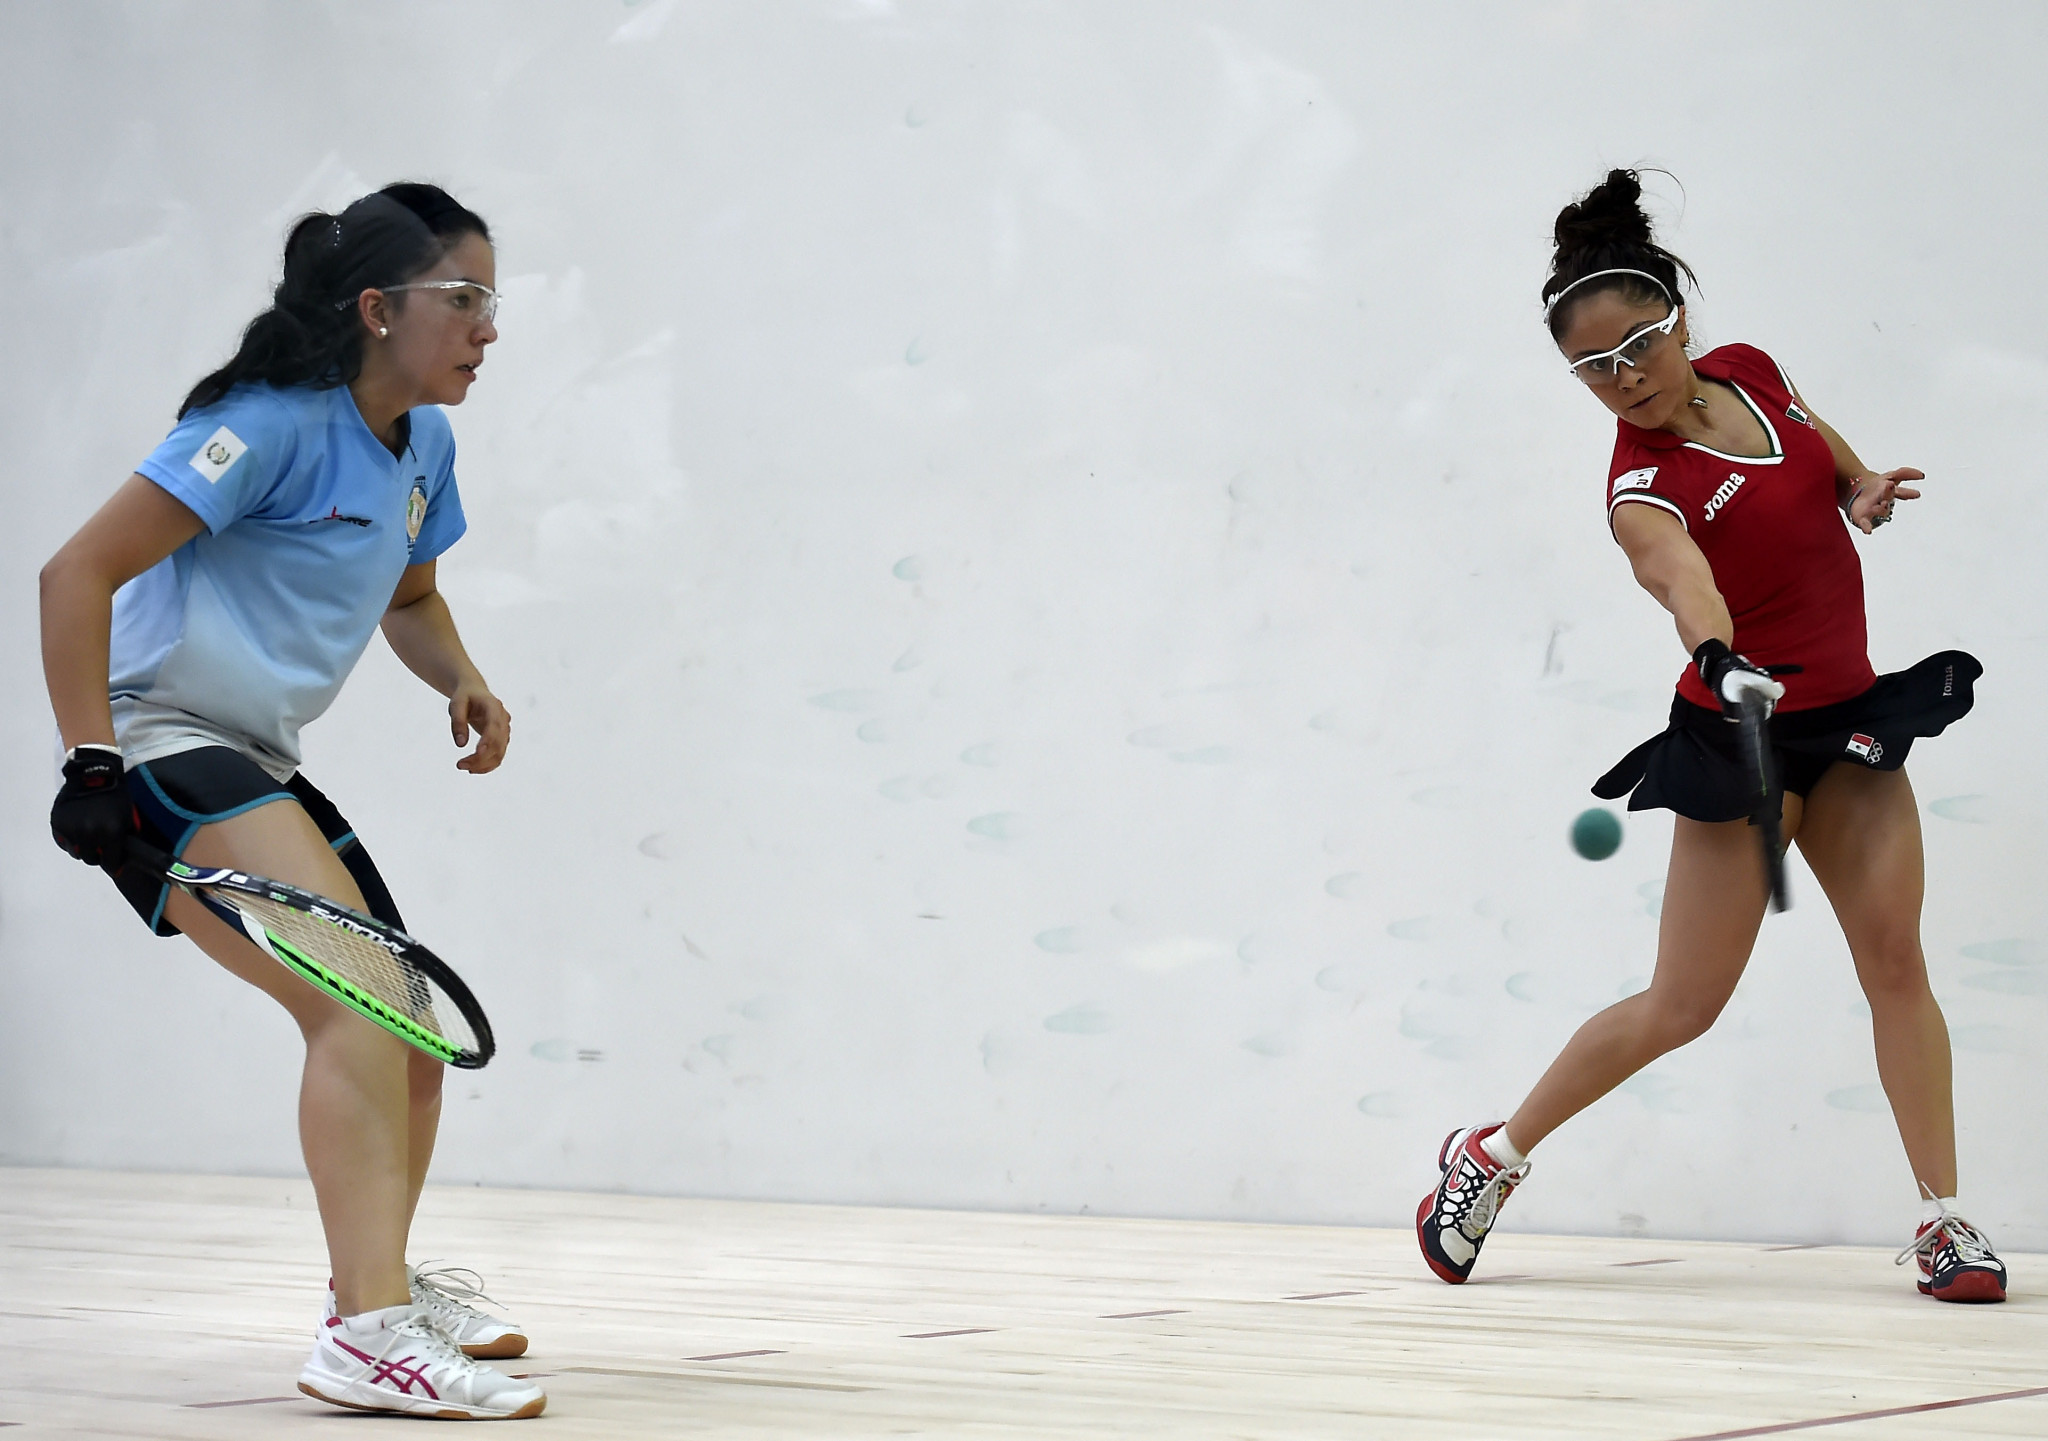 The IRF still hopes to hold a racquetball competition in China ©Getty Images